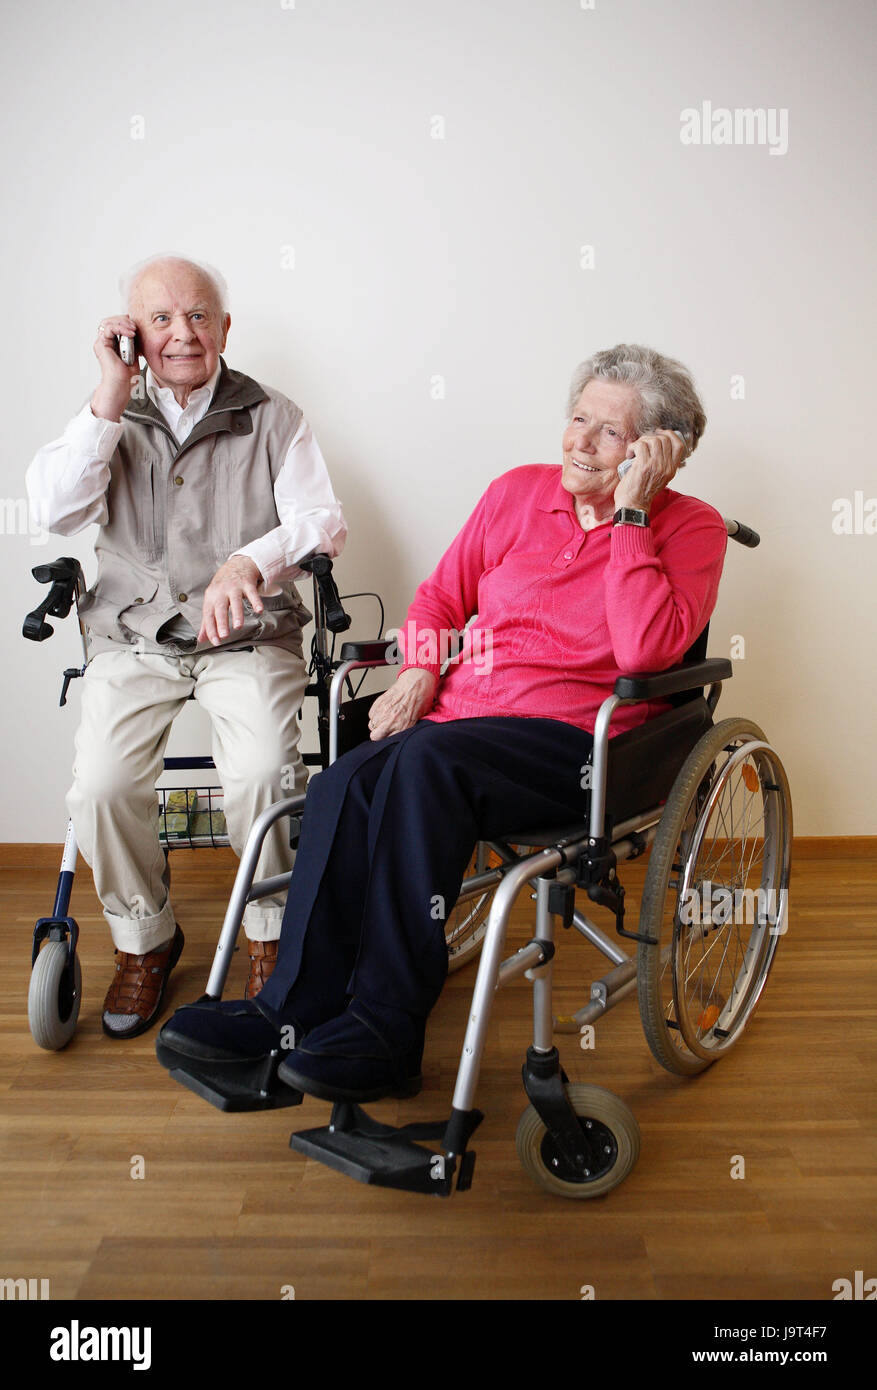 Senior citizen's couple,happily sit,invalid's wheel chair,walking help,mobile phones,call up,people,married couple,senior citizens,couple,old,happily,joy of living,actively,geriatric care,old care,cohesion,old age,partnership,old people's home,nursing home,disease,health,communication,telecommunication,telephone calls,inside,two, Stock Photo